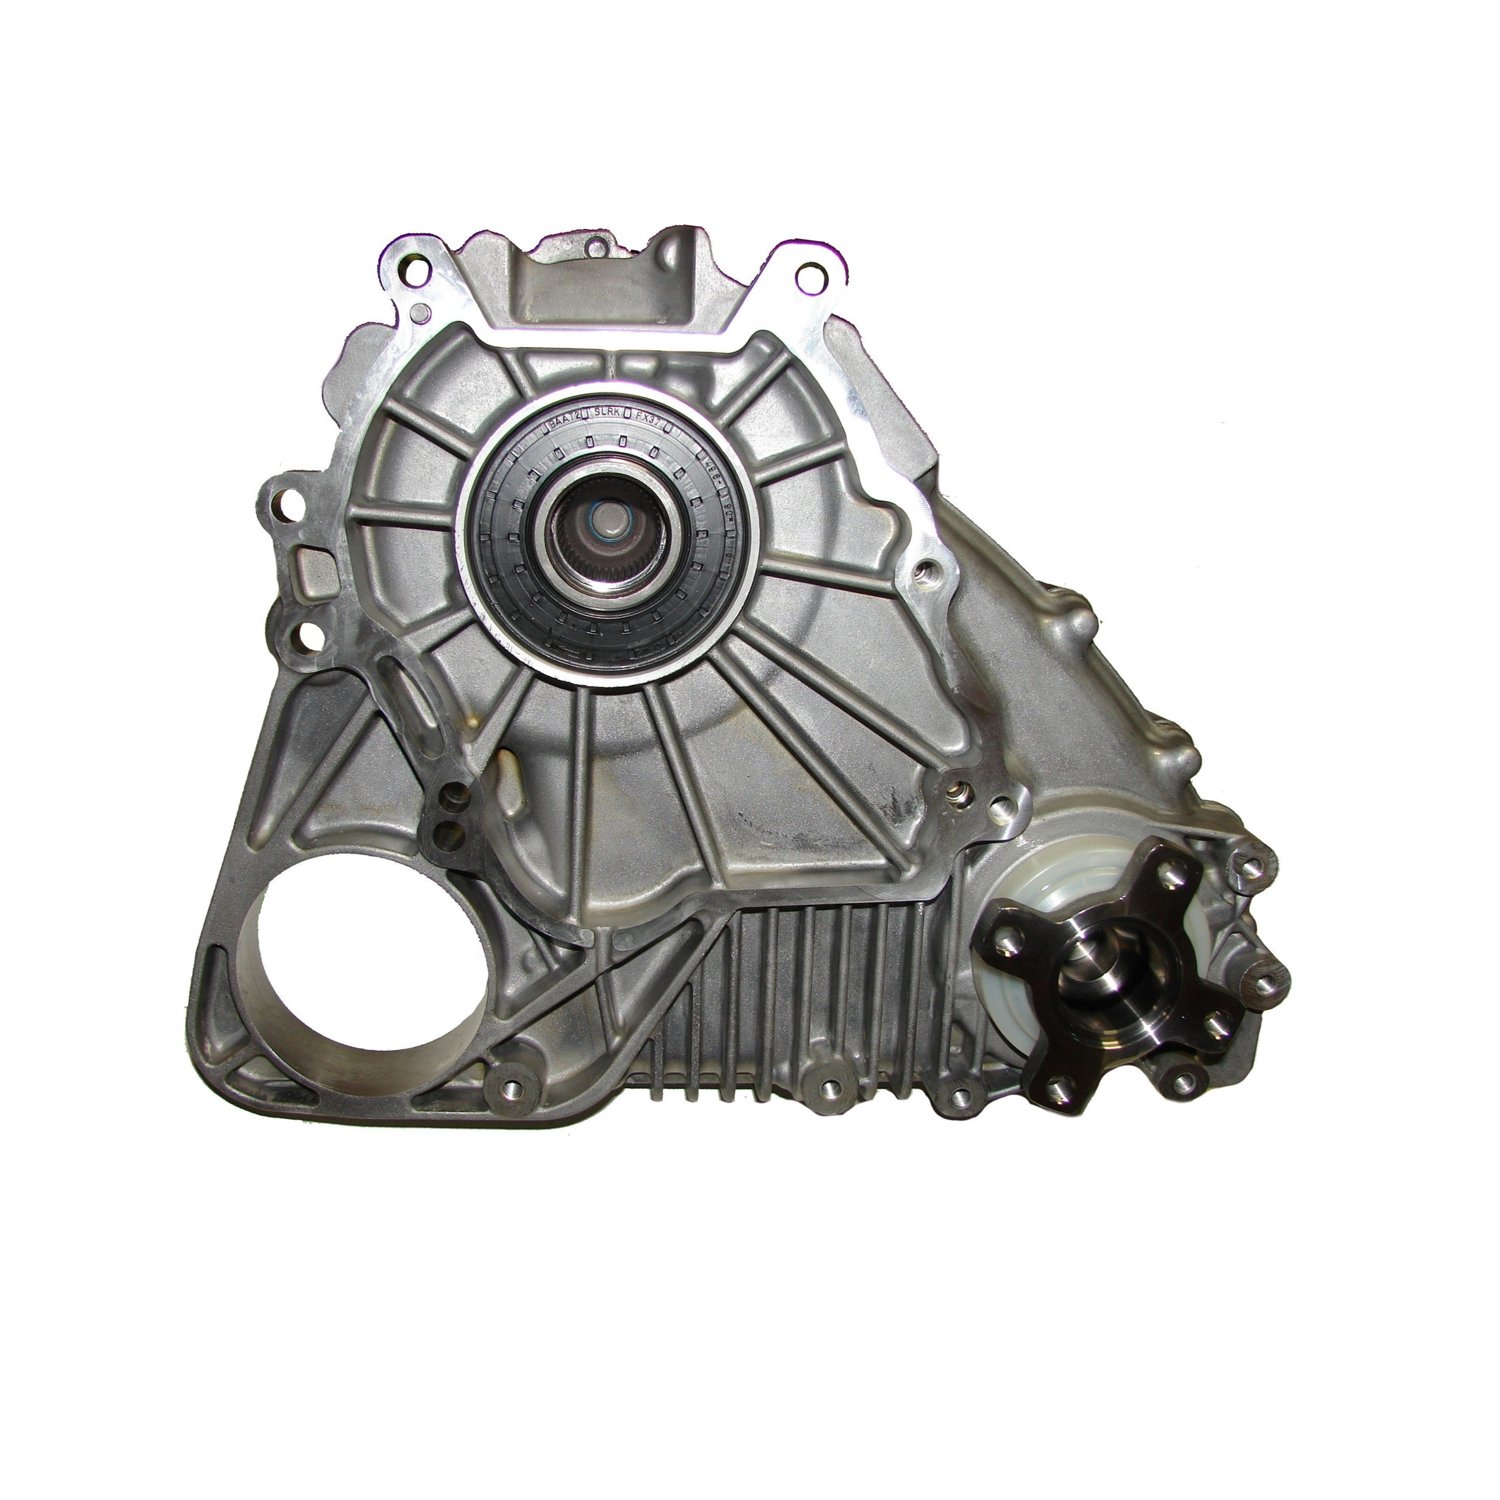 Remanufactured ATC400 Transfer Case for BMW 04-06 X3